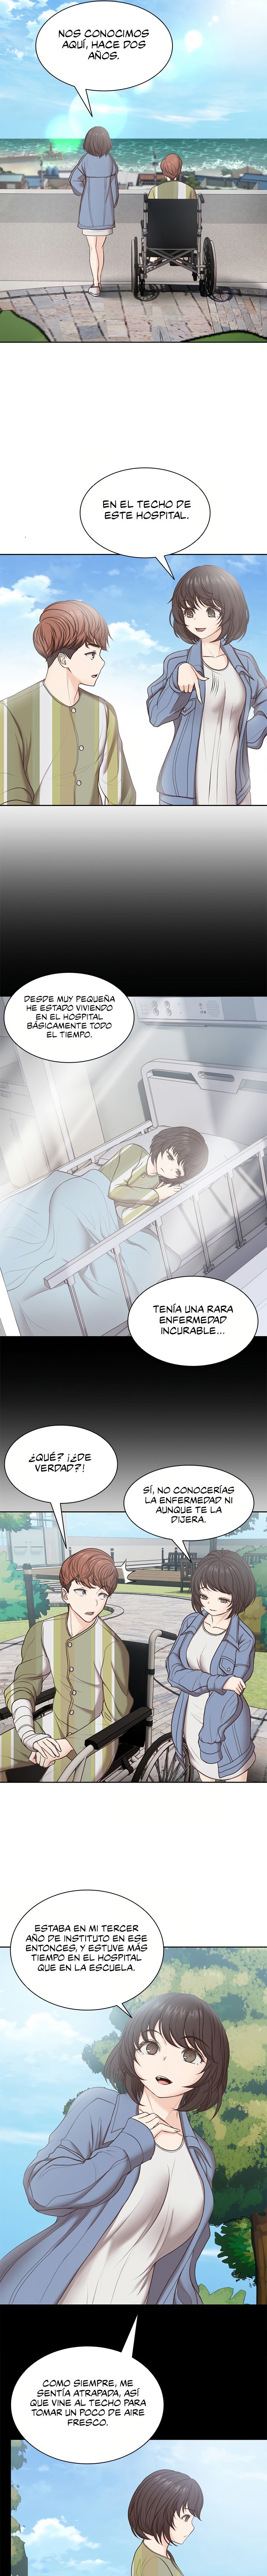 Amnesia Raw - Chapter 7 Page 4